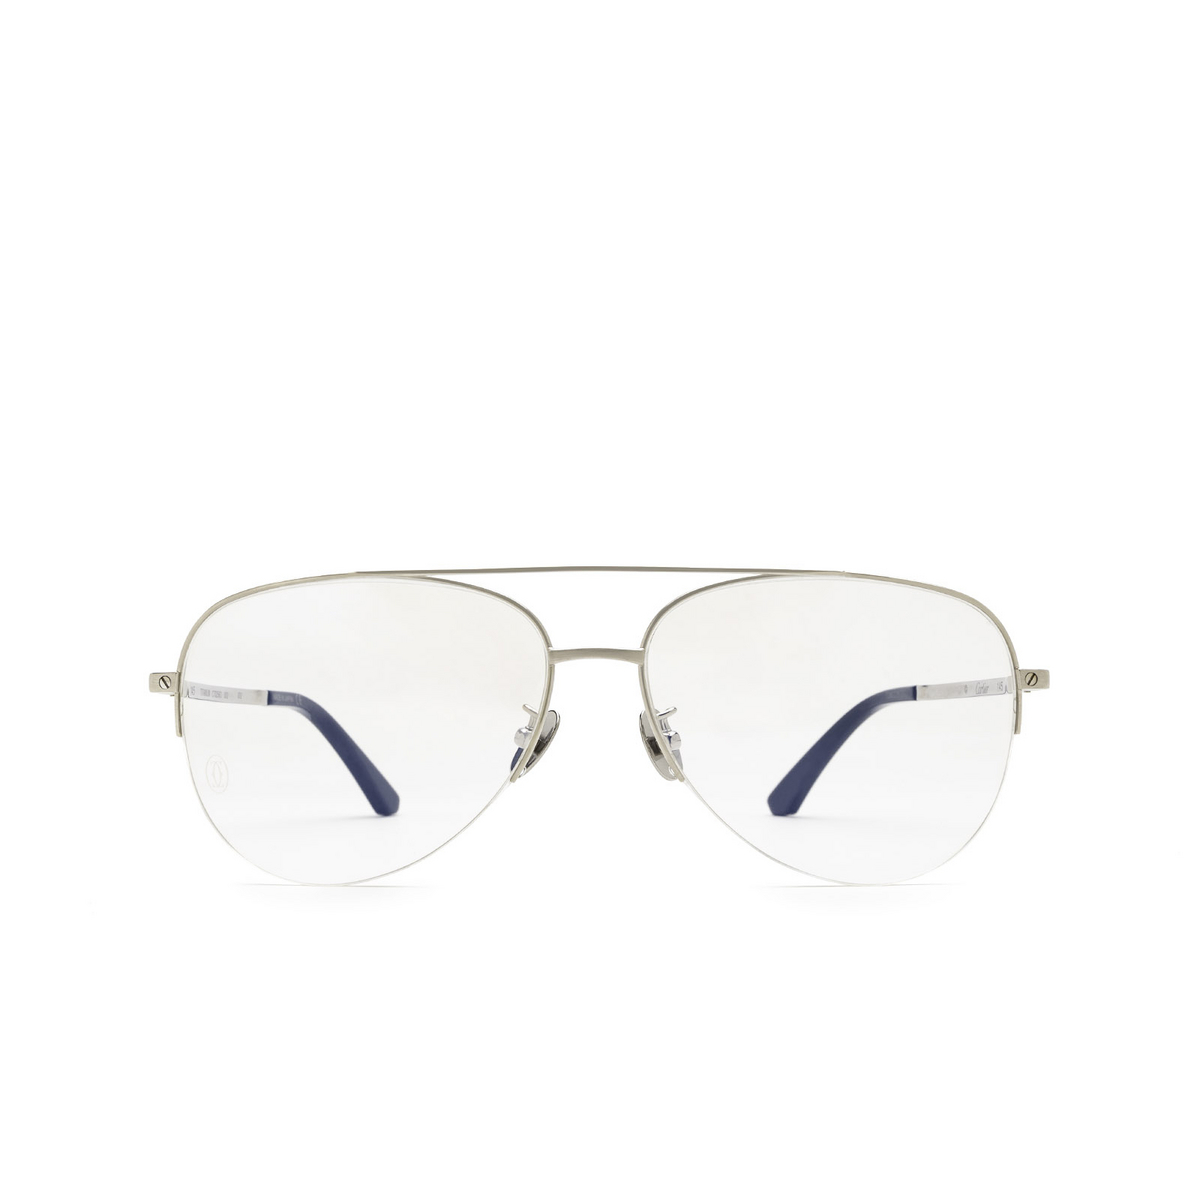 Cartier® Aviator Eyeglasses: CT0256O color 002 Silver - front view